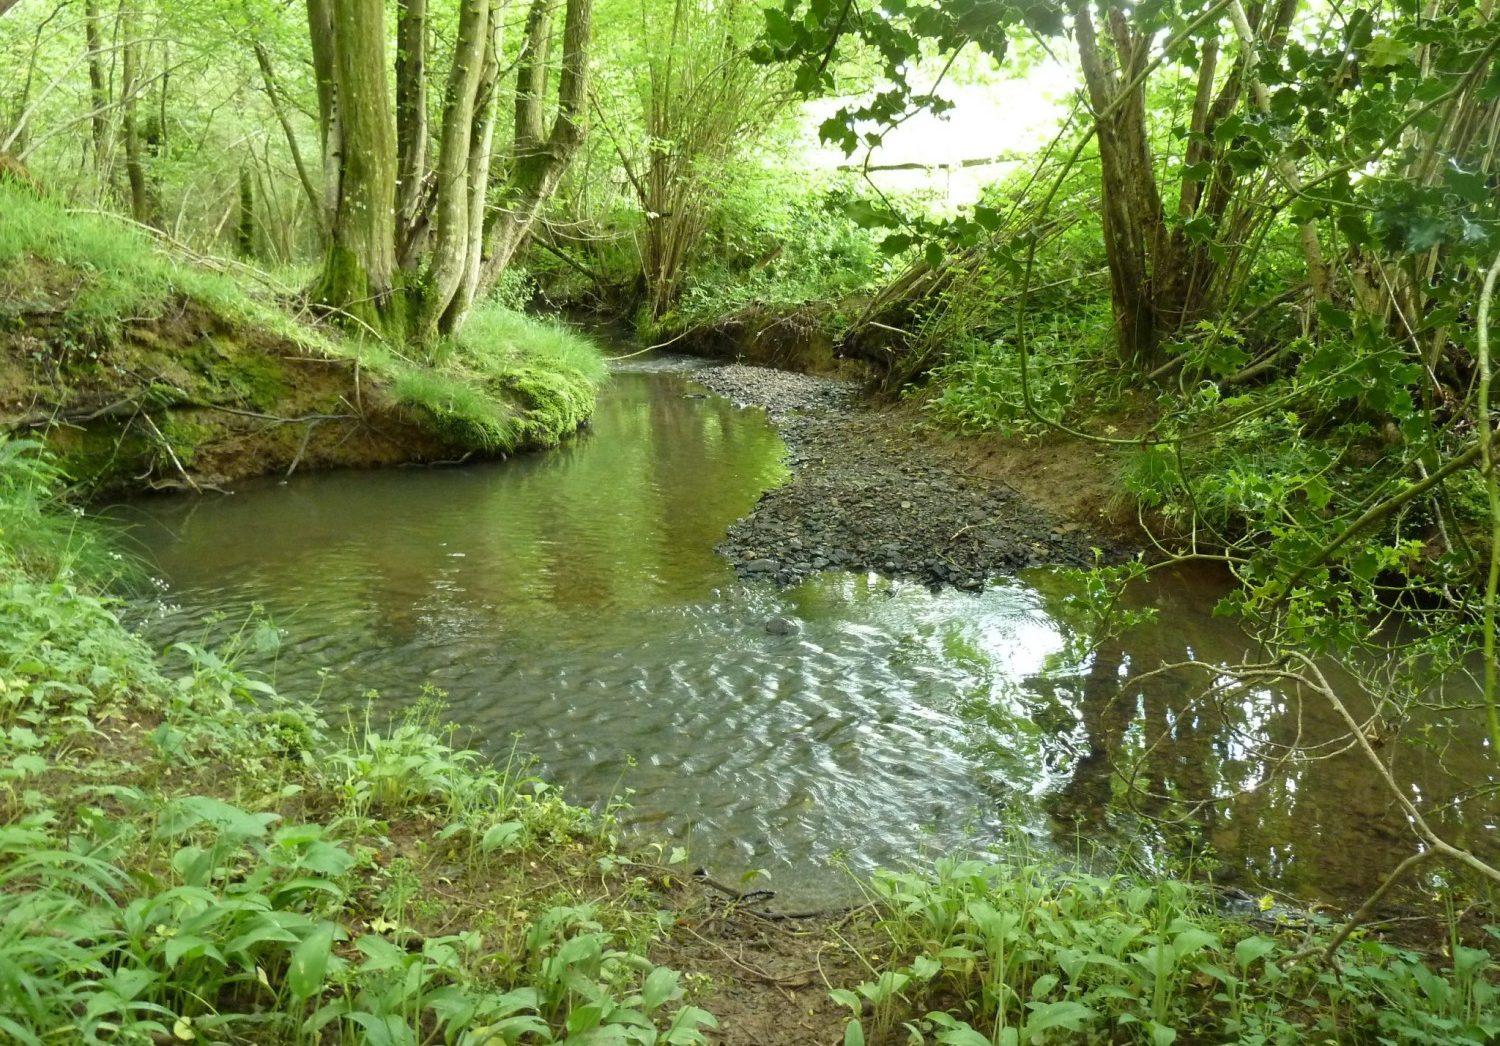 Using herbicides near streams and rivers